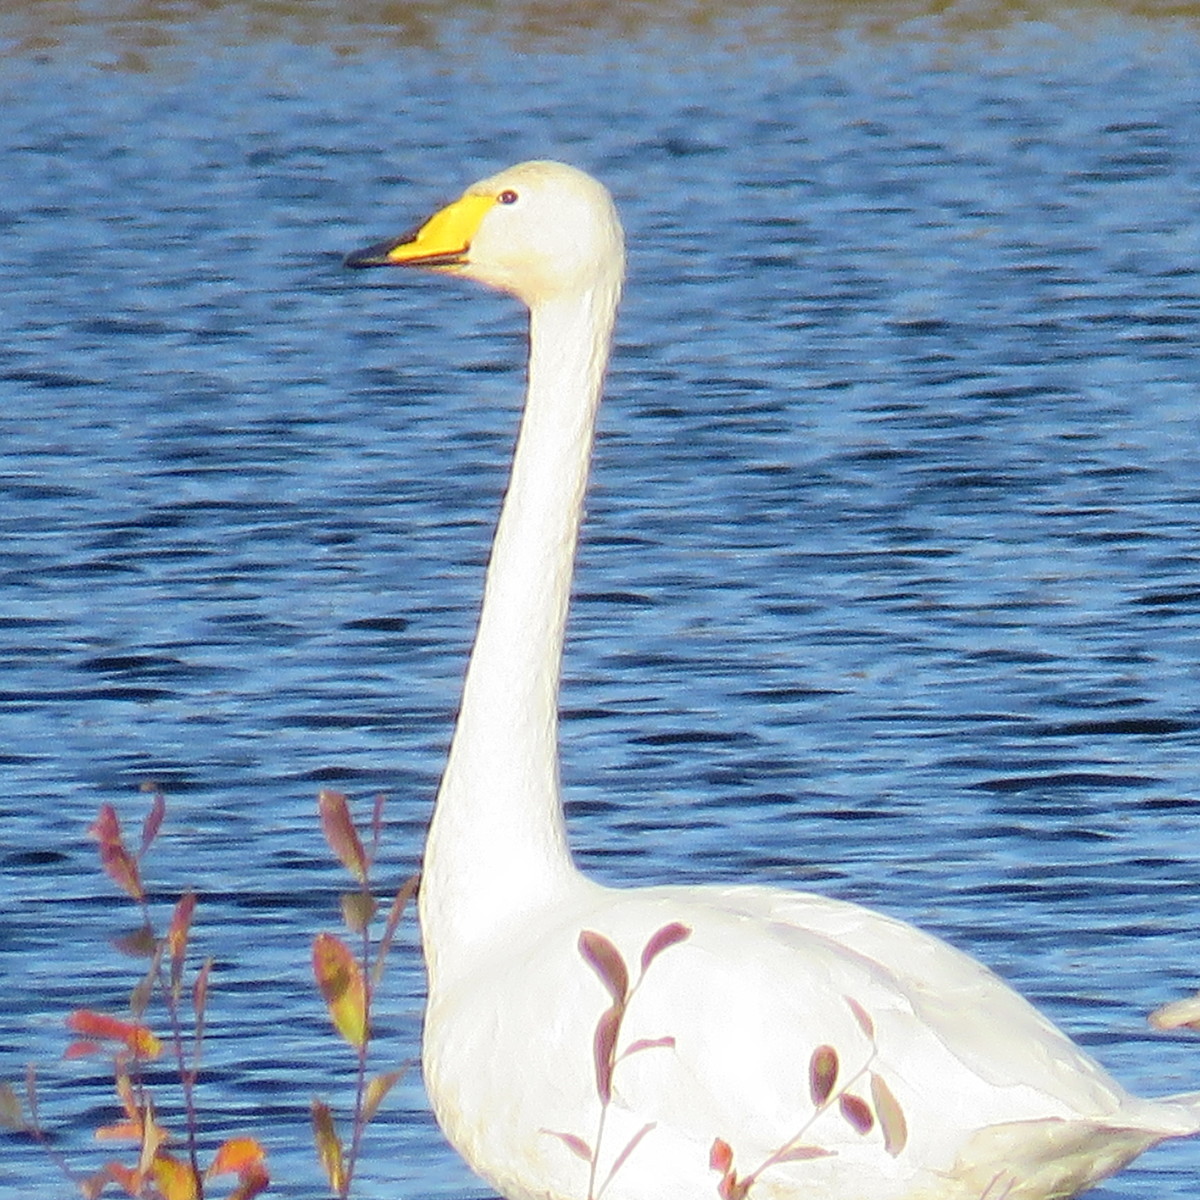 Whooper swan on Chat Moss, Irlam, UK